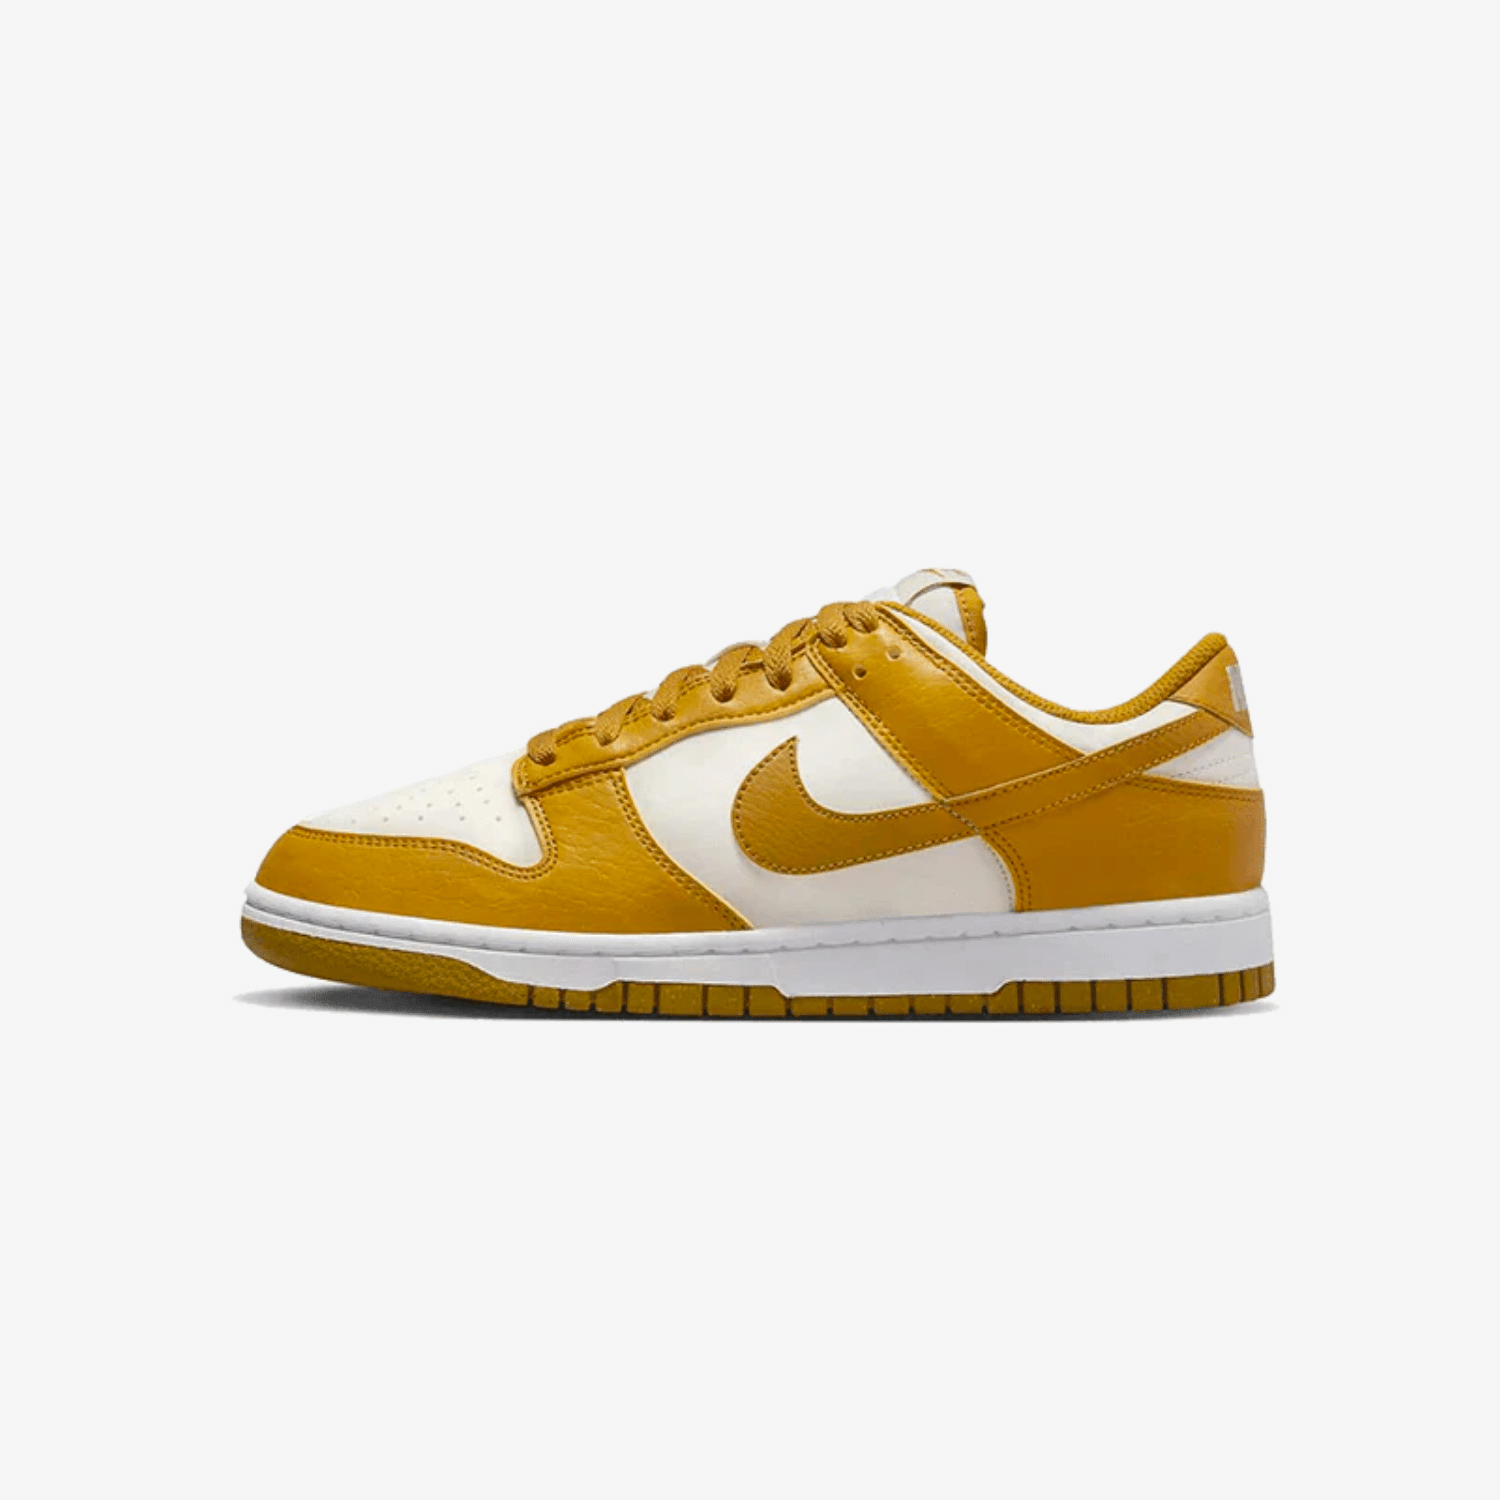     nike-dunk-low-gold-suede-DN1431-001-unfazed-1